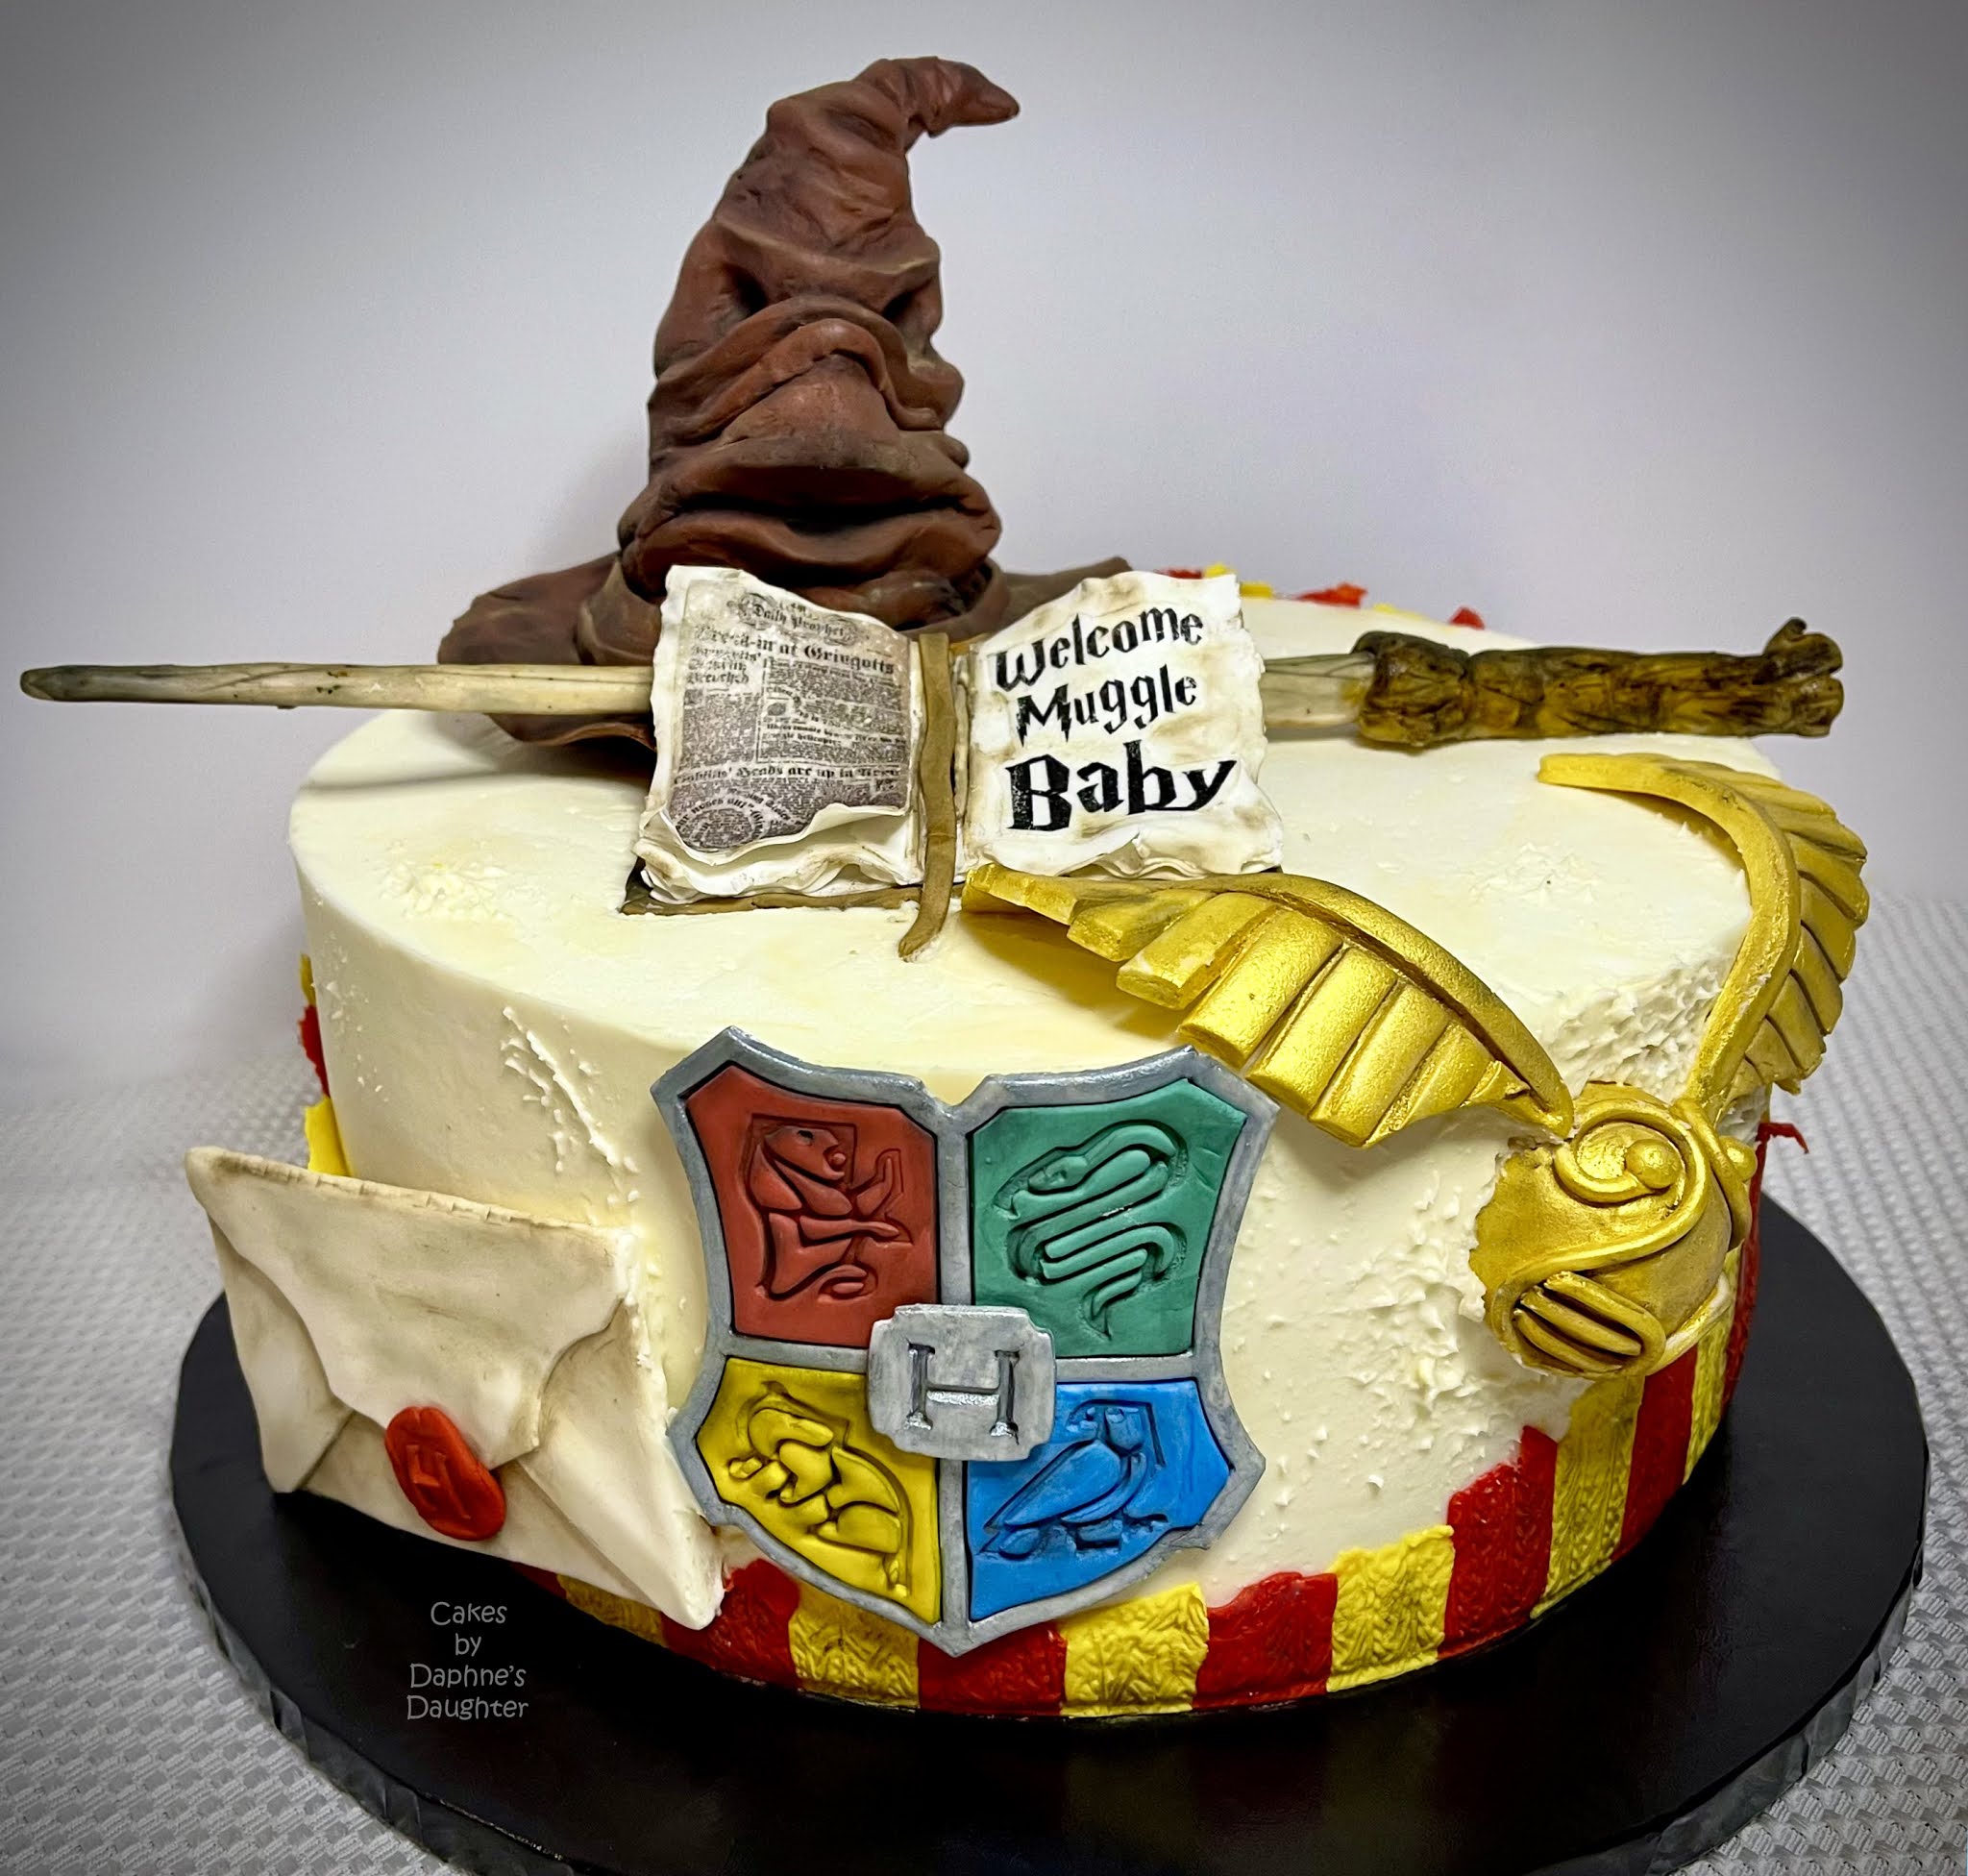 The Bake More: Harry Potter Baby Shower Cake & Cookie - Welcome